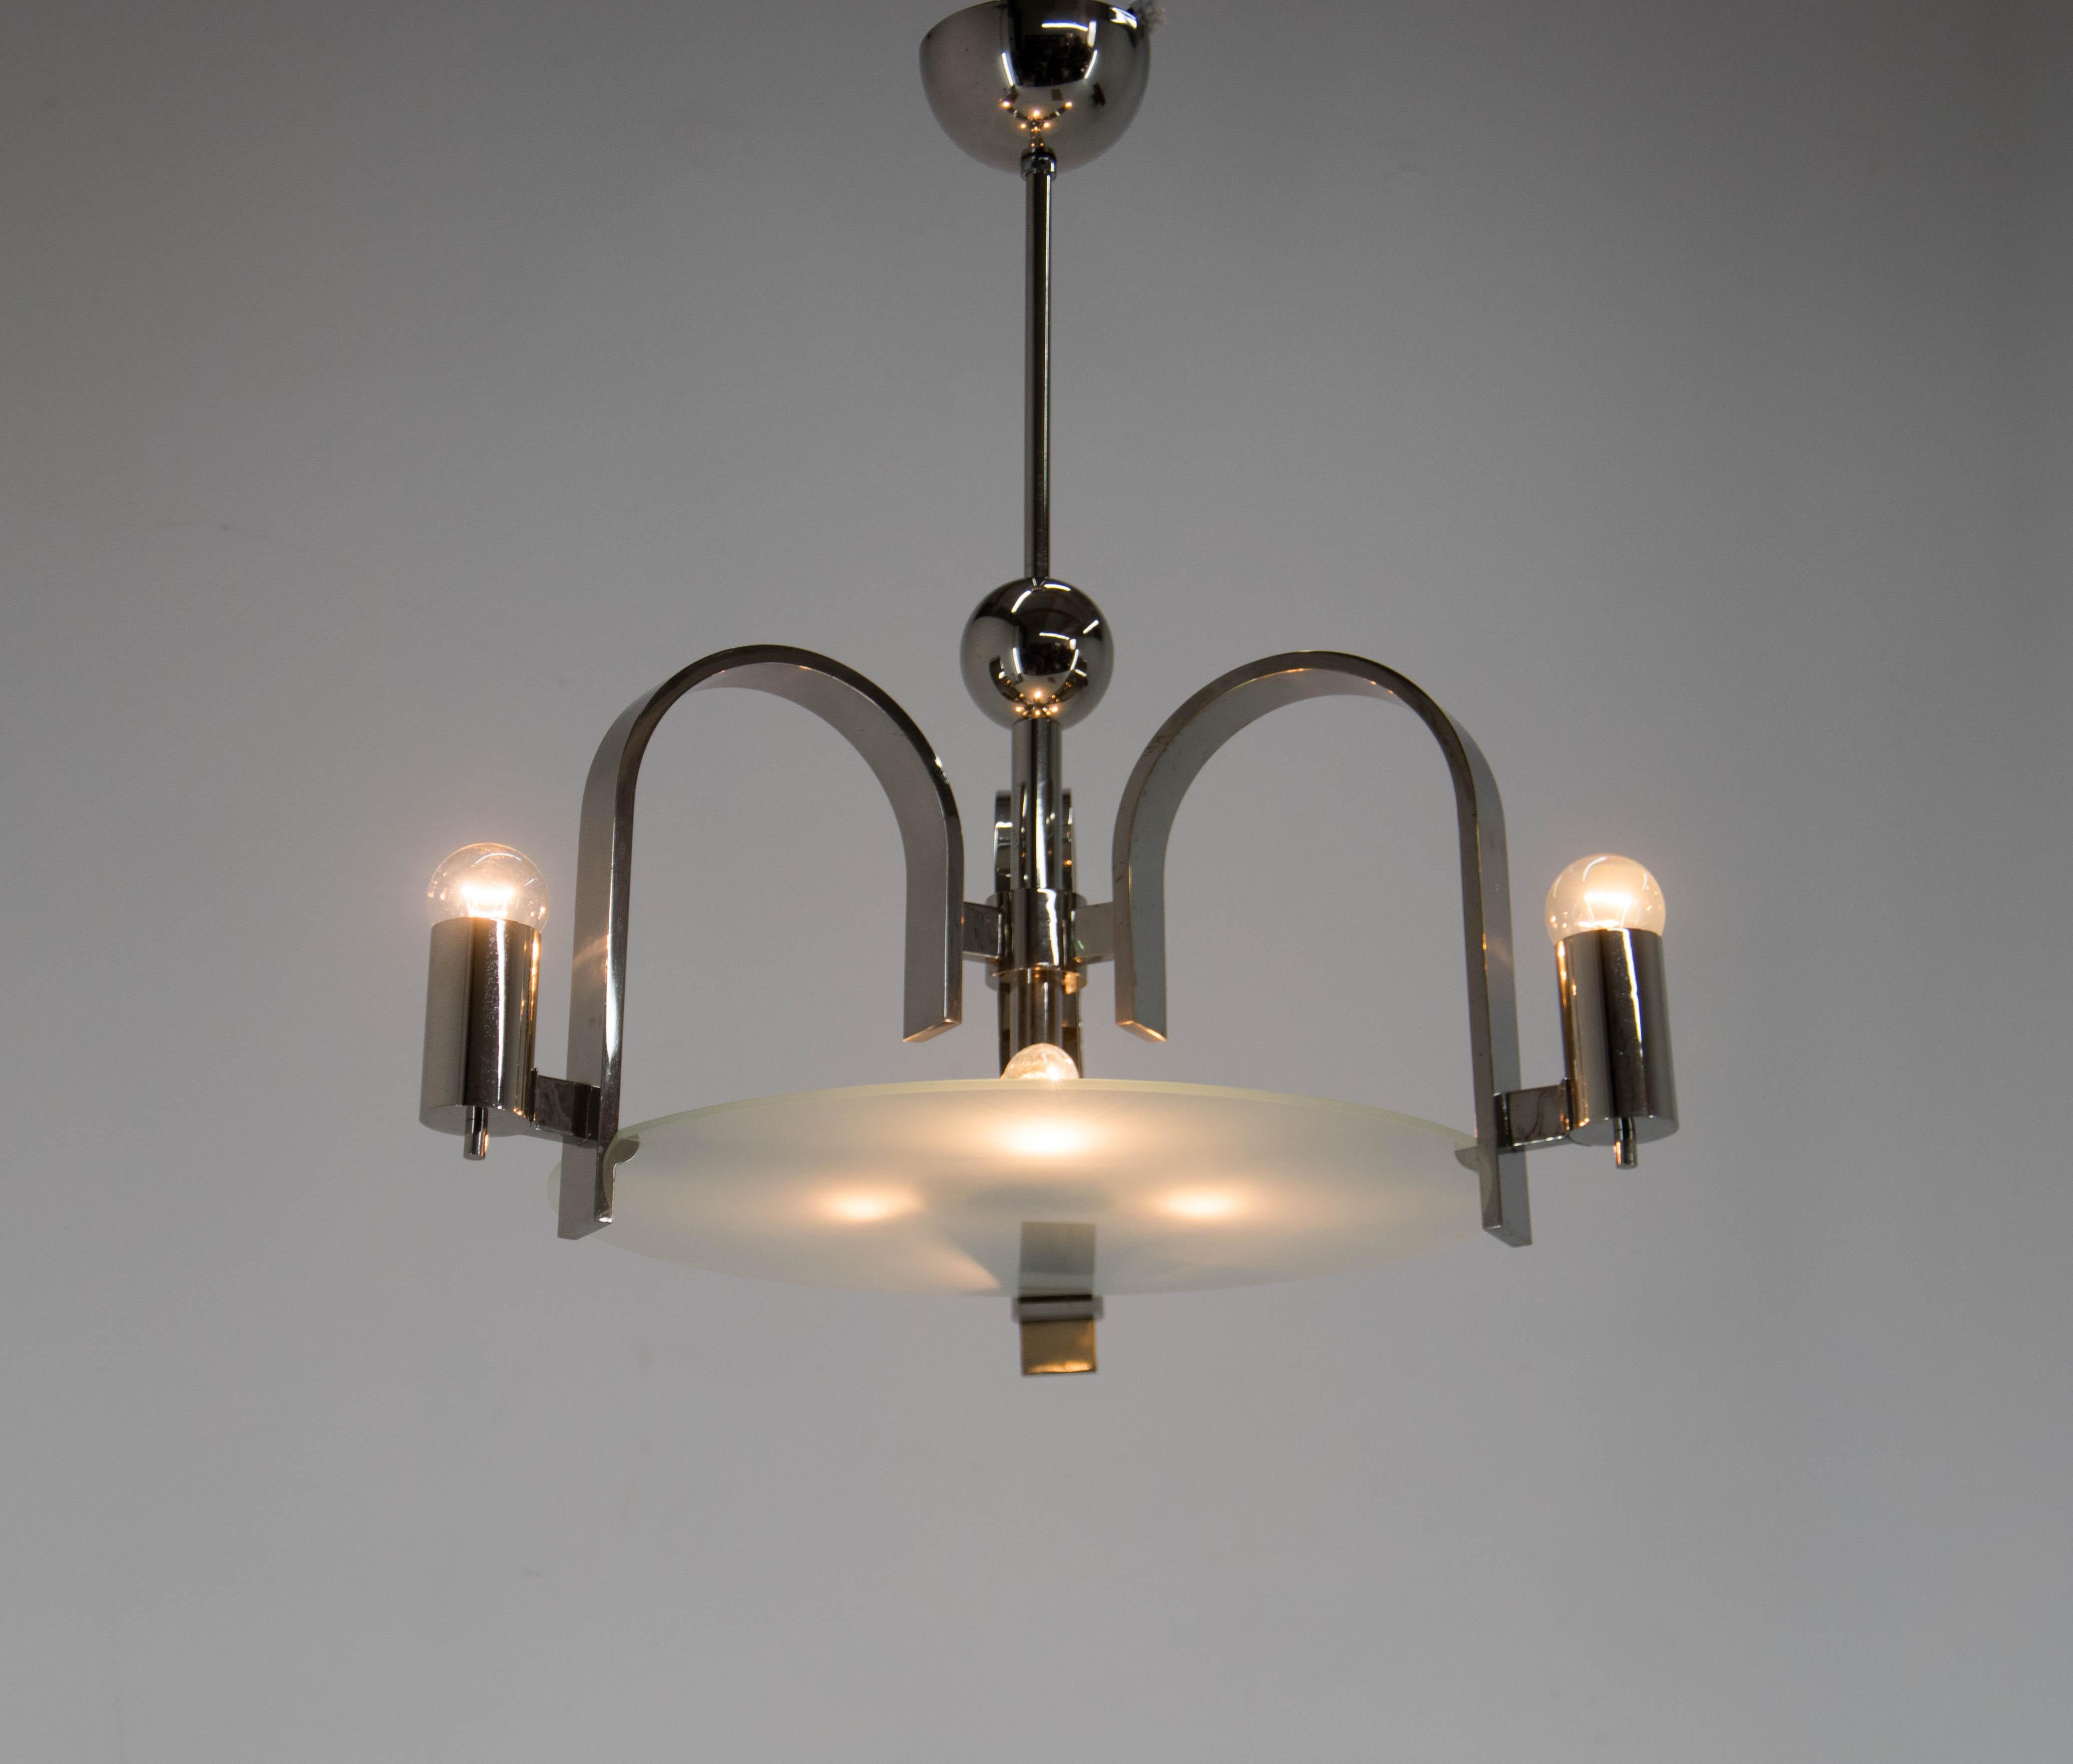 Czech Machine Age / Functionalism Chandelier, 1930s, Restored For Sale